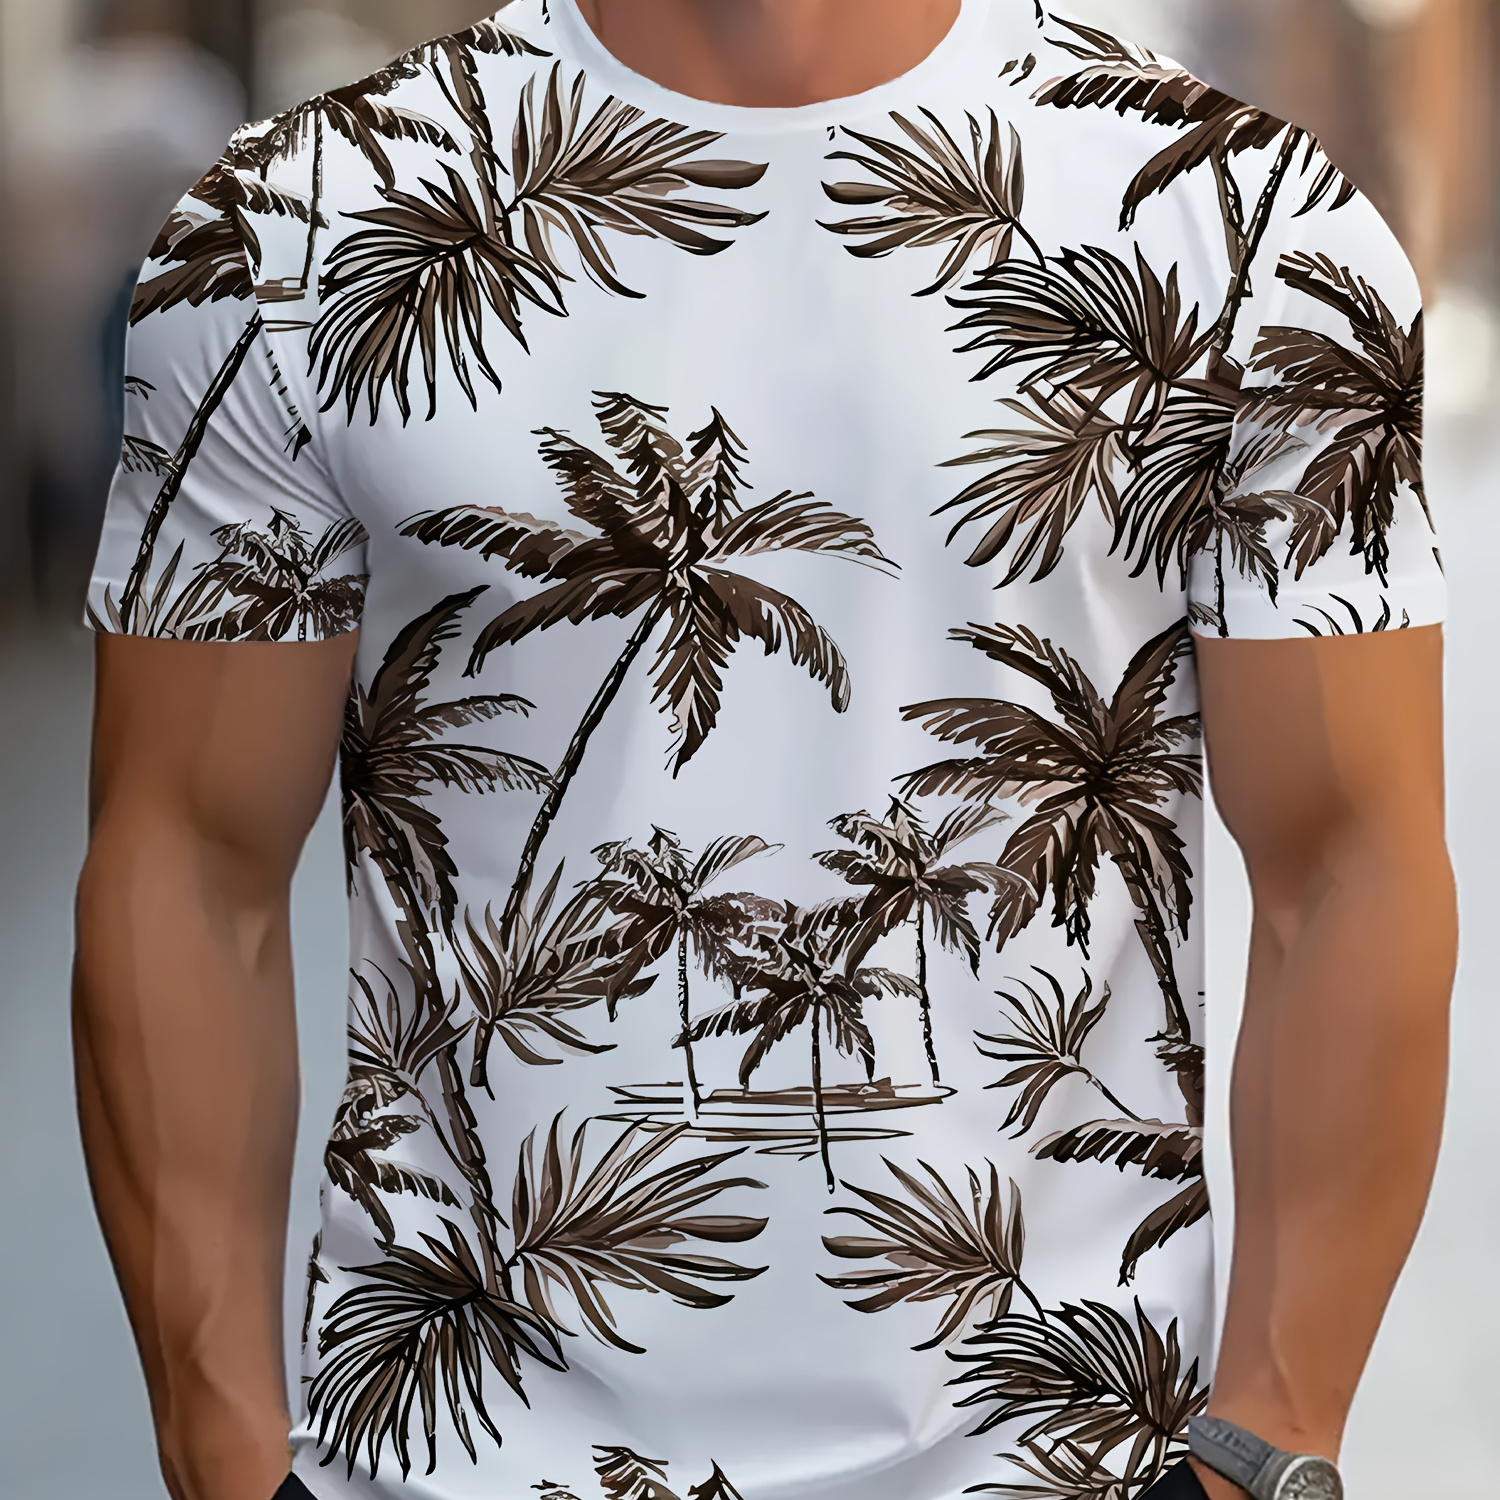 

Men's Tropical Coconut Tree Pattern Crew Neck And Short Sleeve T-shirt, Chic And Trendy Tops For Summer Leisurewear And Beach Vacation